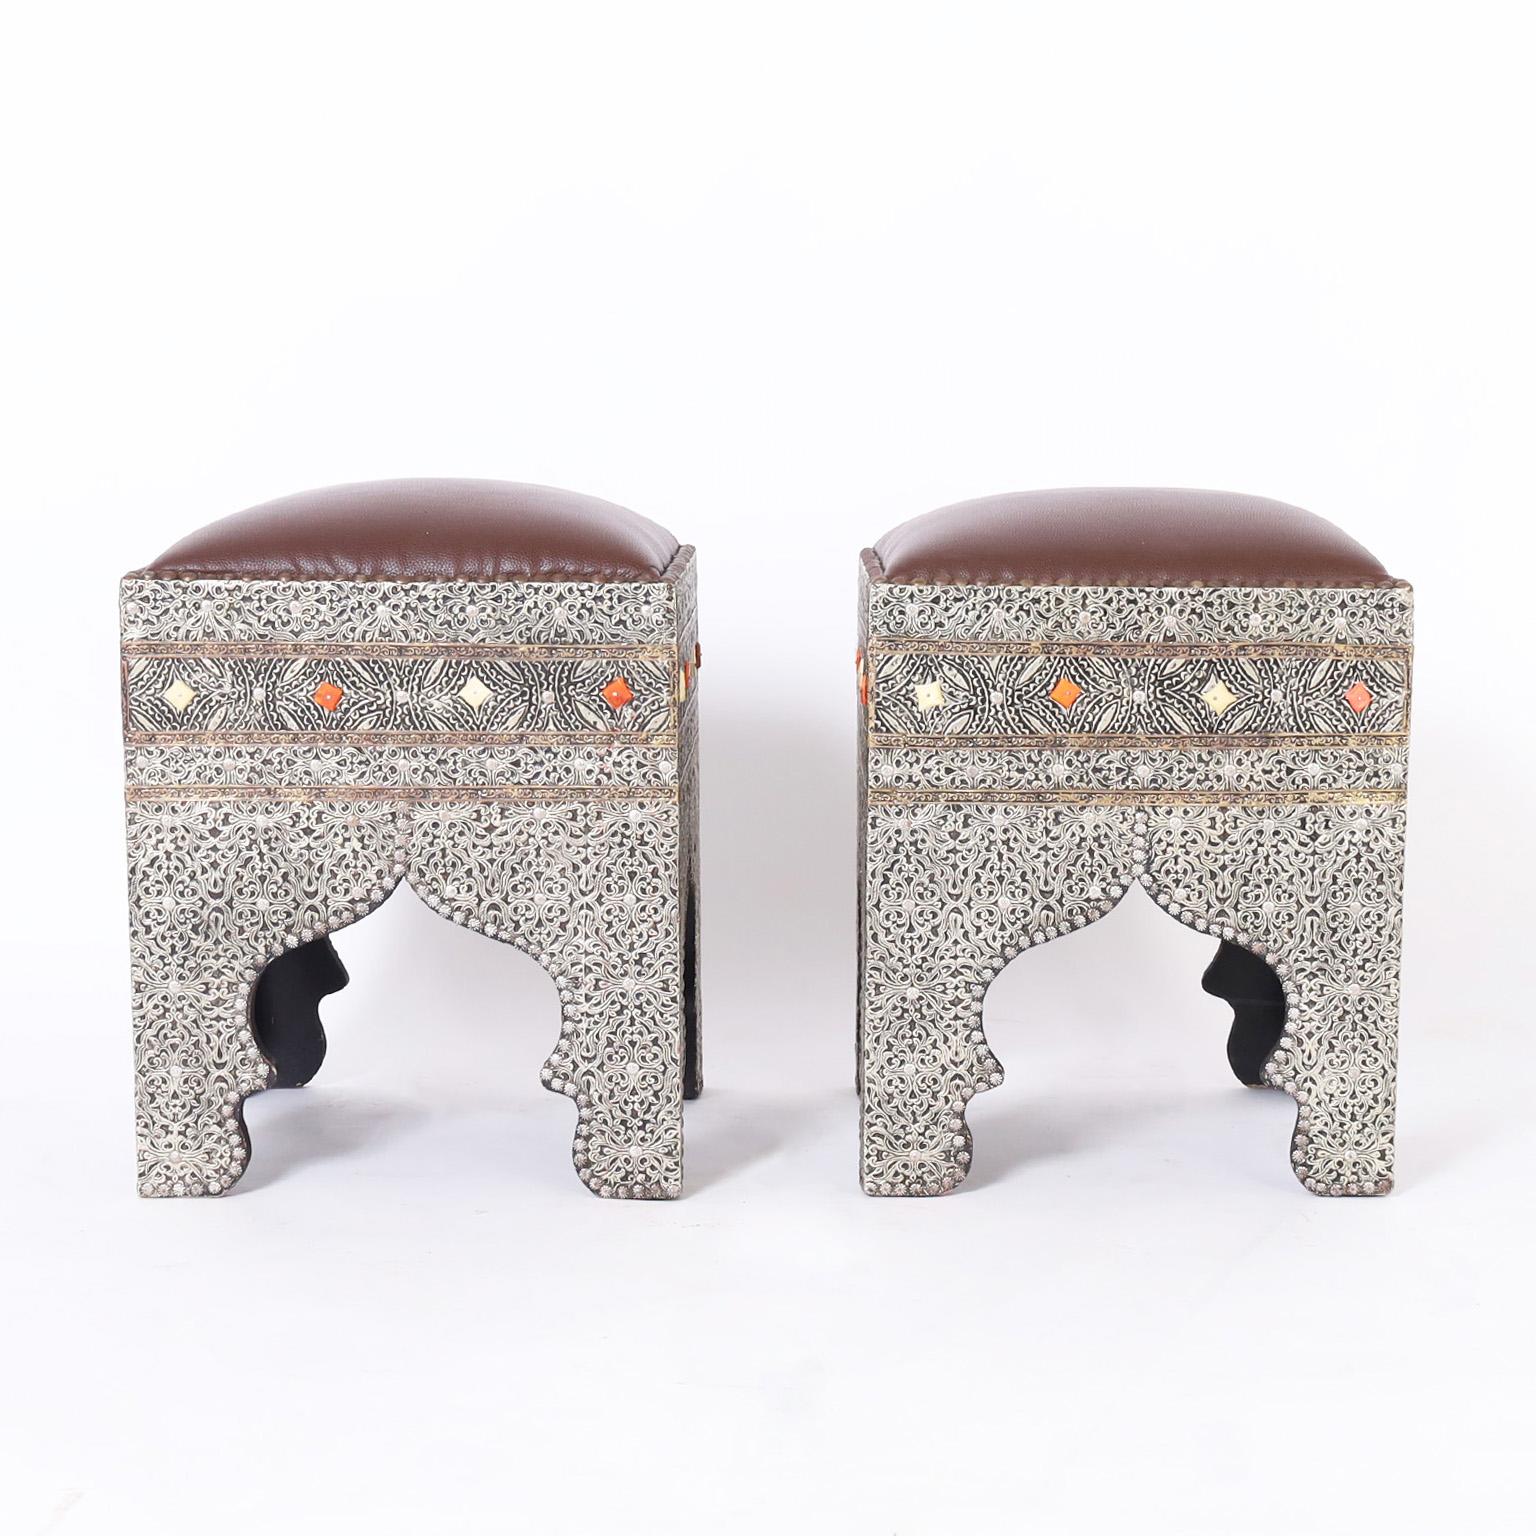 Impressive pair of midcentury Turkish ottomans or stools with upholstered tops with brass tacks over bases having exotic floral metal work, on wood frames, decorated with bone, and having architecturally interesting arches.